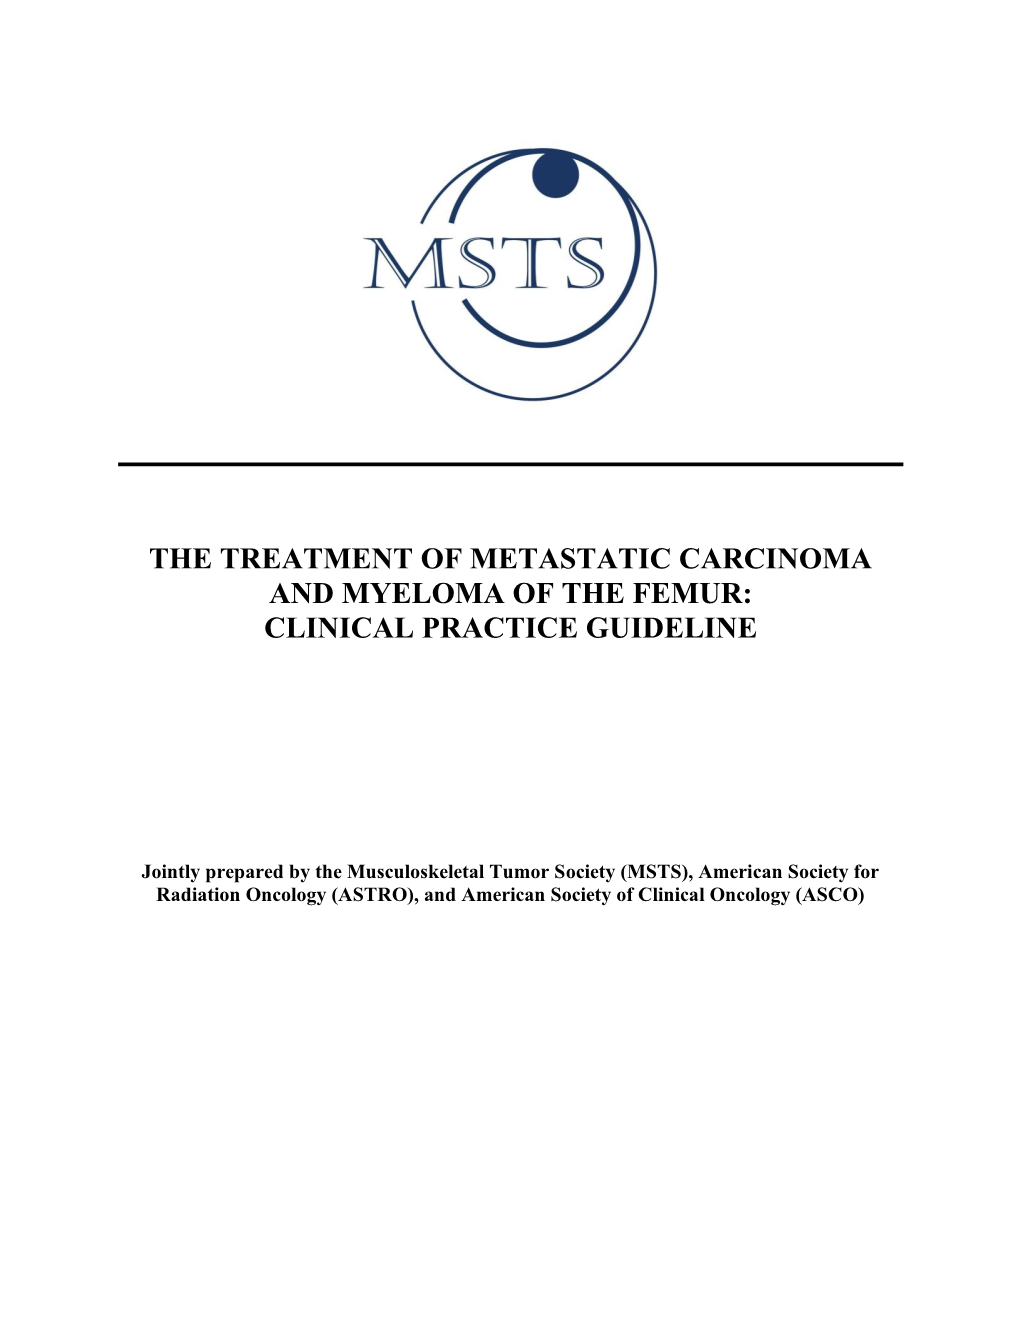 The Treatment of Metastatic Carcinoma and Myeloma of the Femur: Clinical Practice Guideline